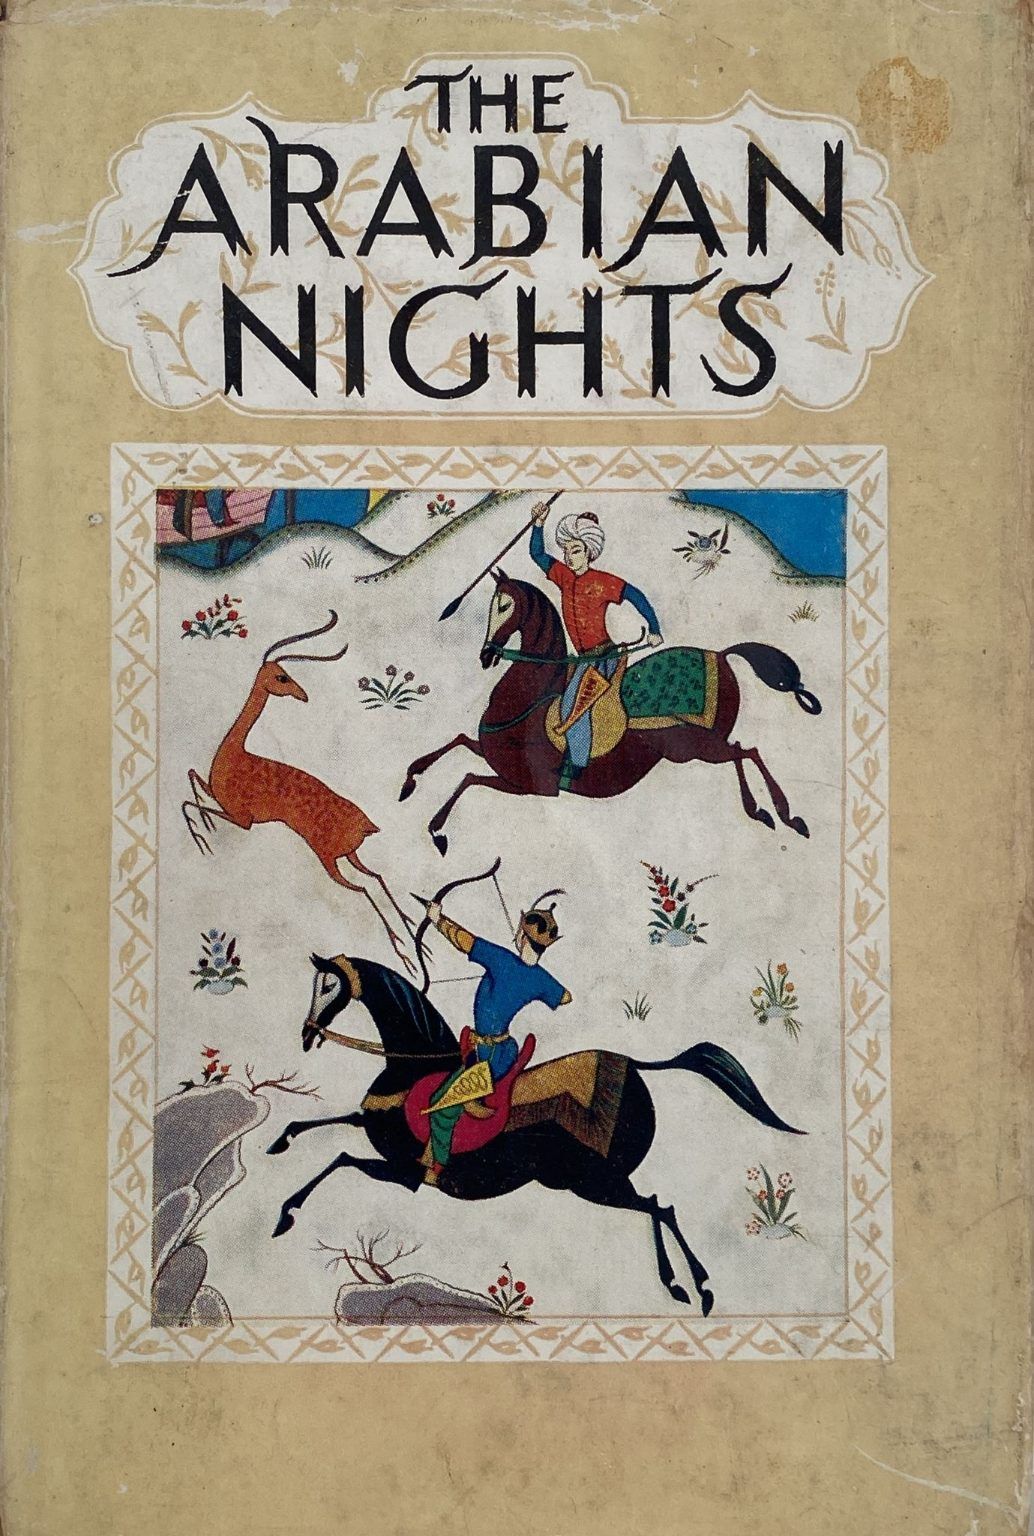 FAIRY TALES FROM THE ARABIAN NIGHTS